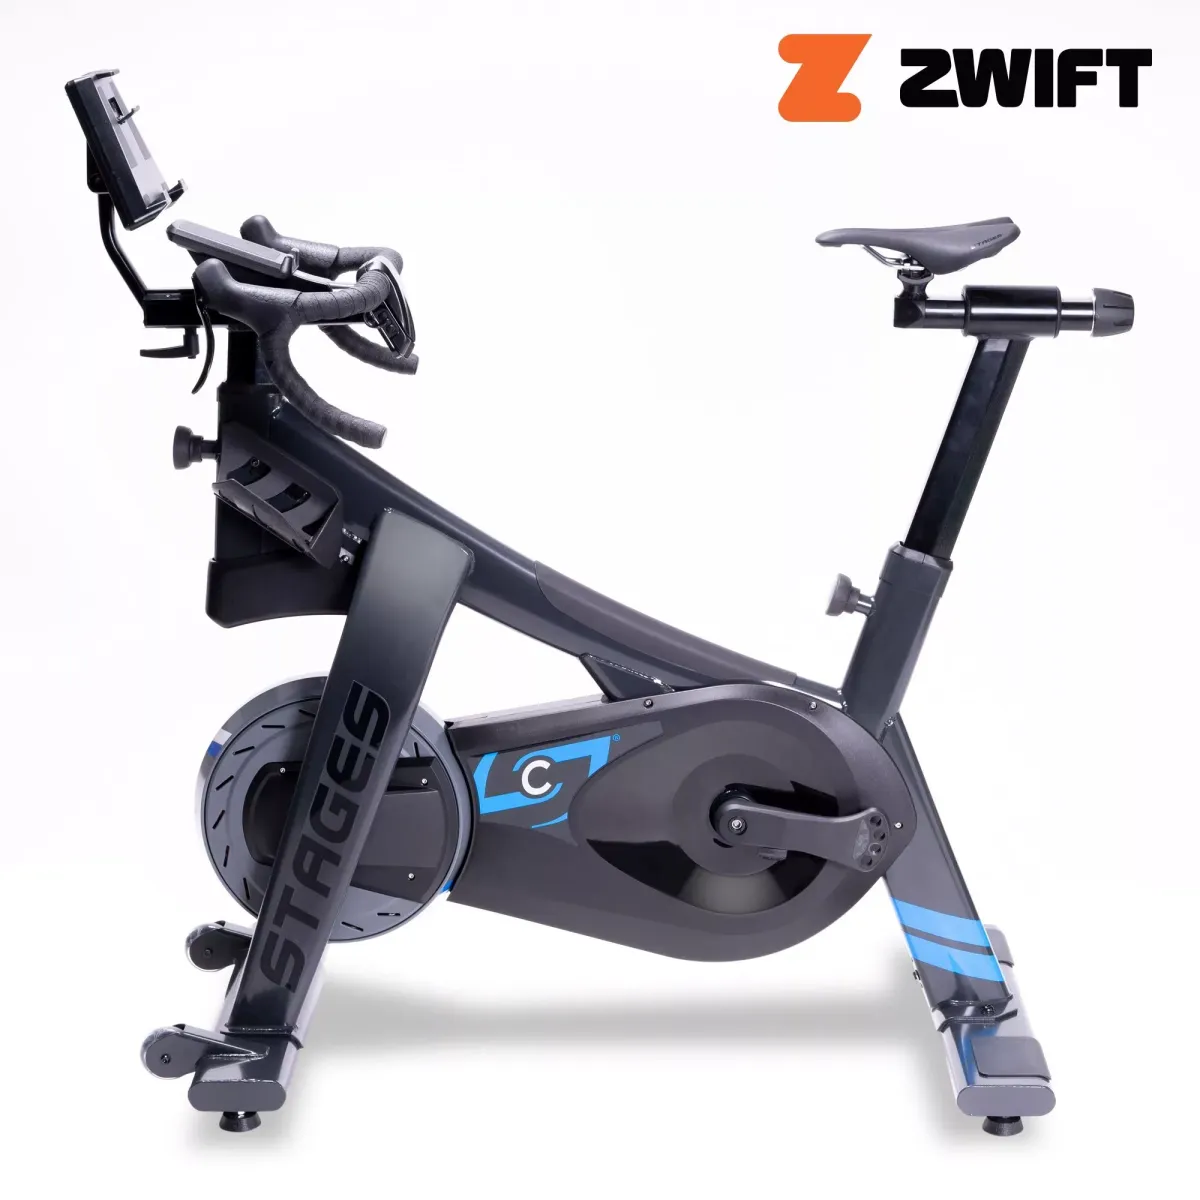 Deal Alert: Stages SB20 Smart Bike and 1 Year of Zwift for $1,399